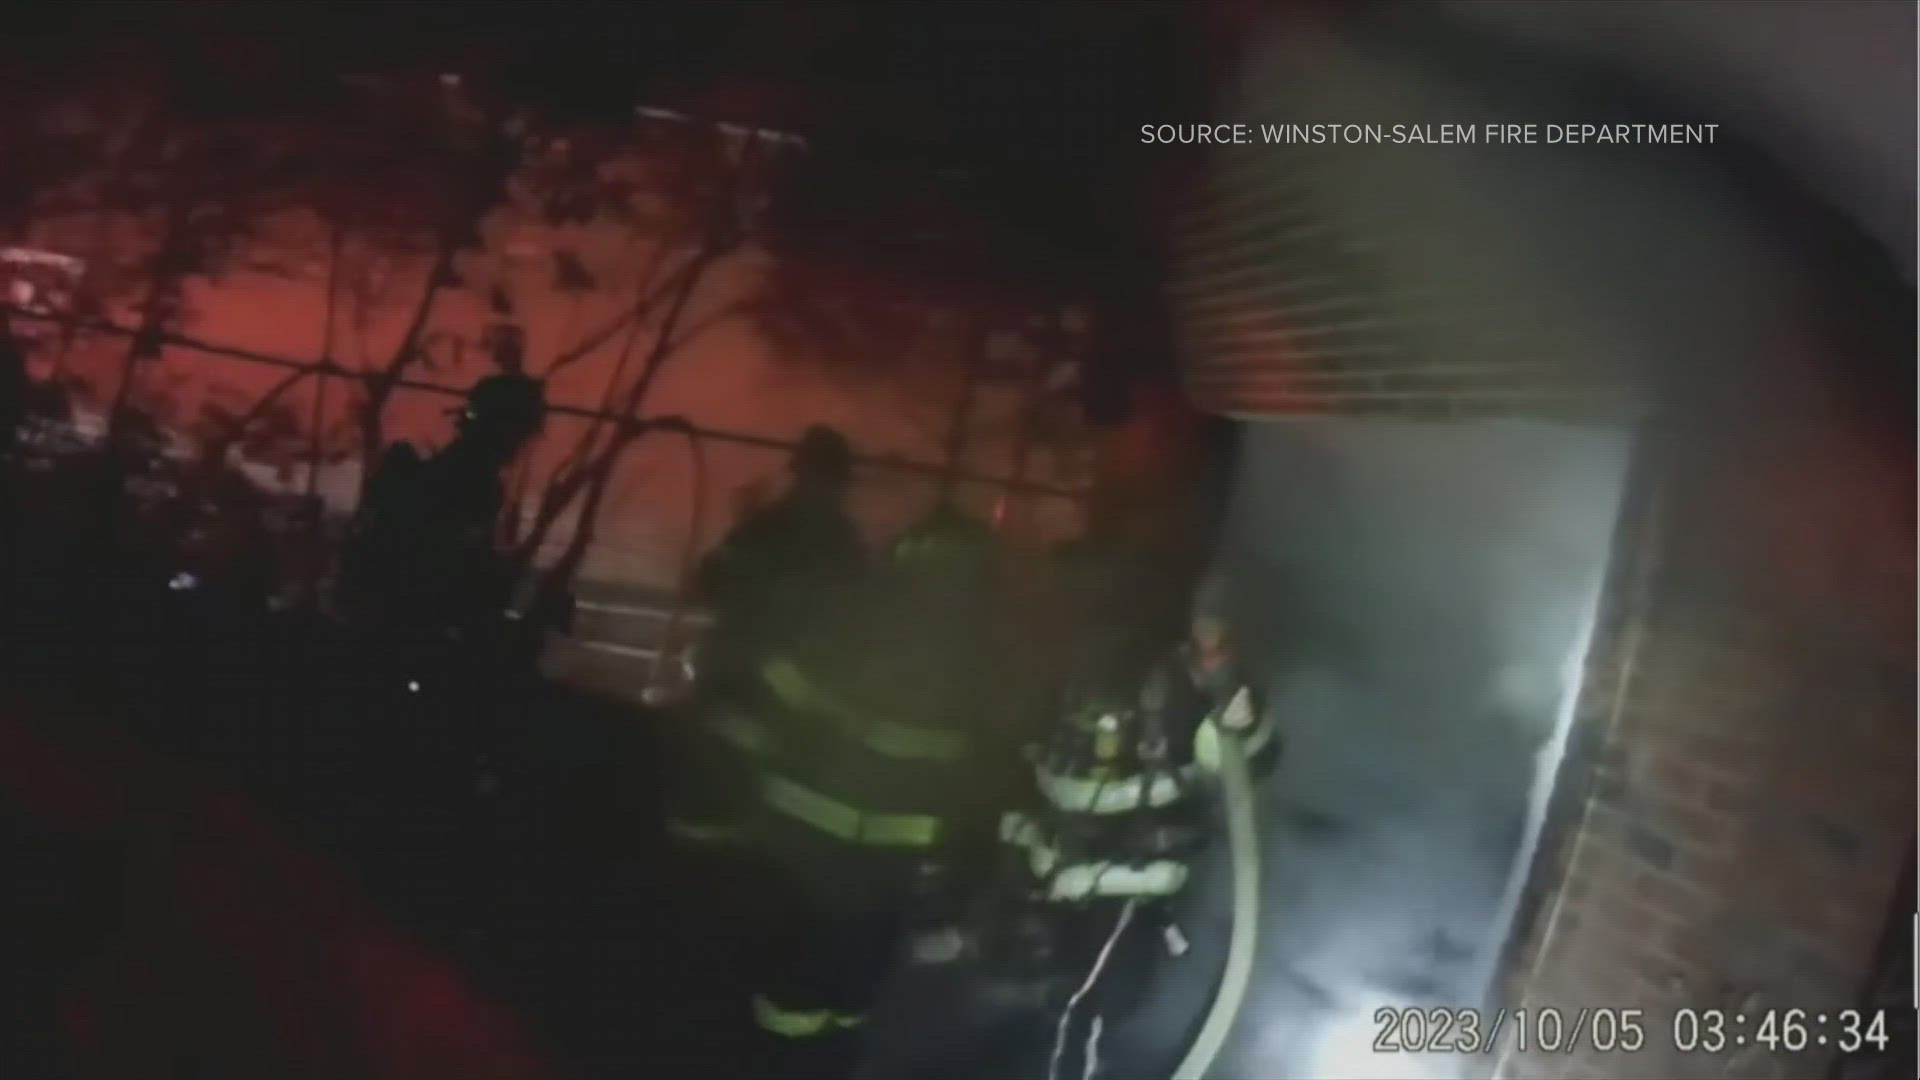 Winston-Salem Fire Chief Trey Mayo said the video shows the dangers his firefighters face daily.